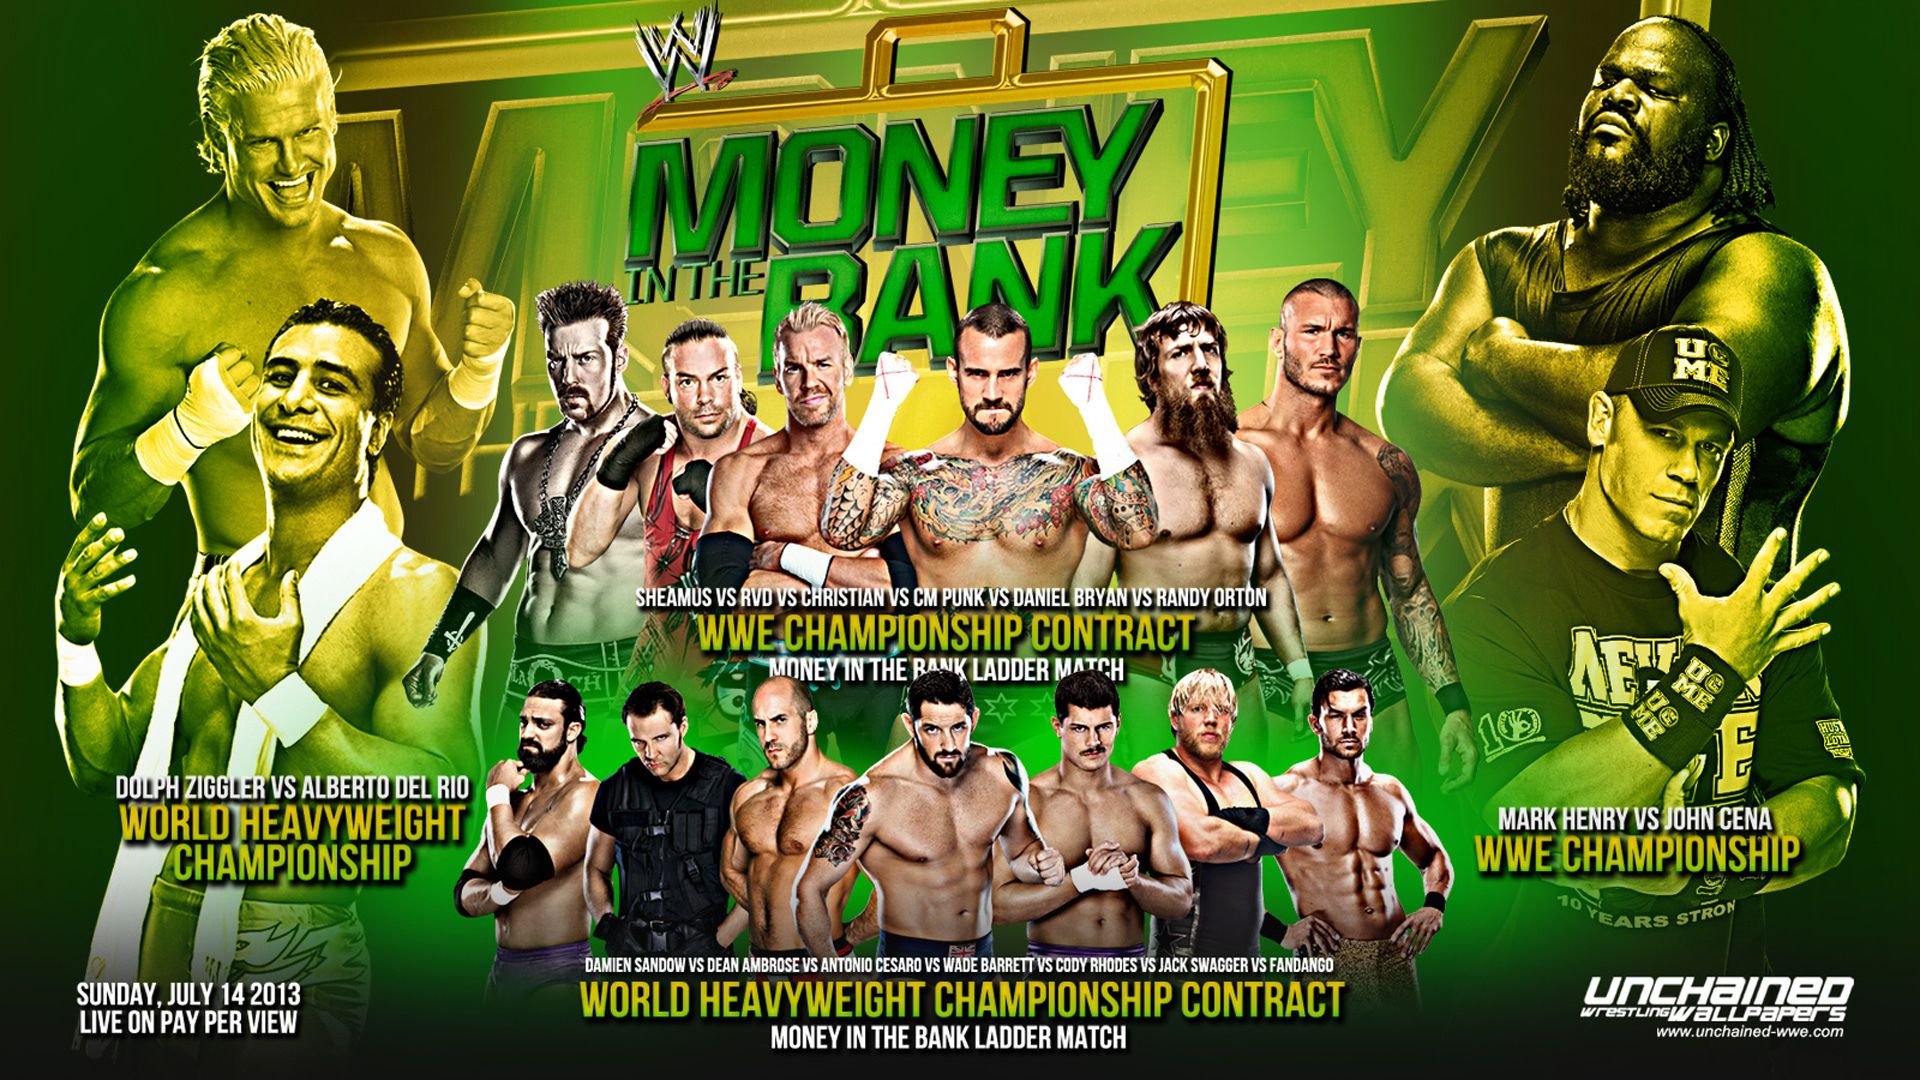 WWE Money in the Bank 2013 Backdrop